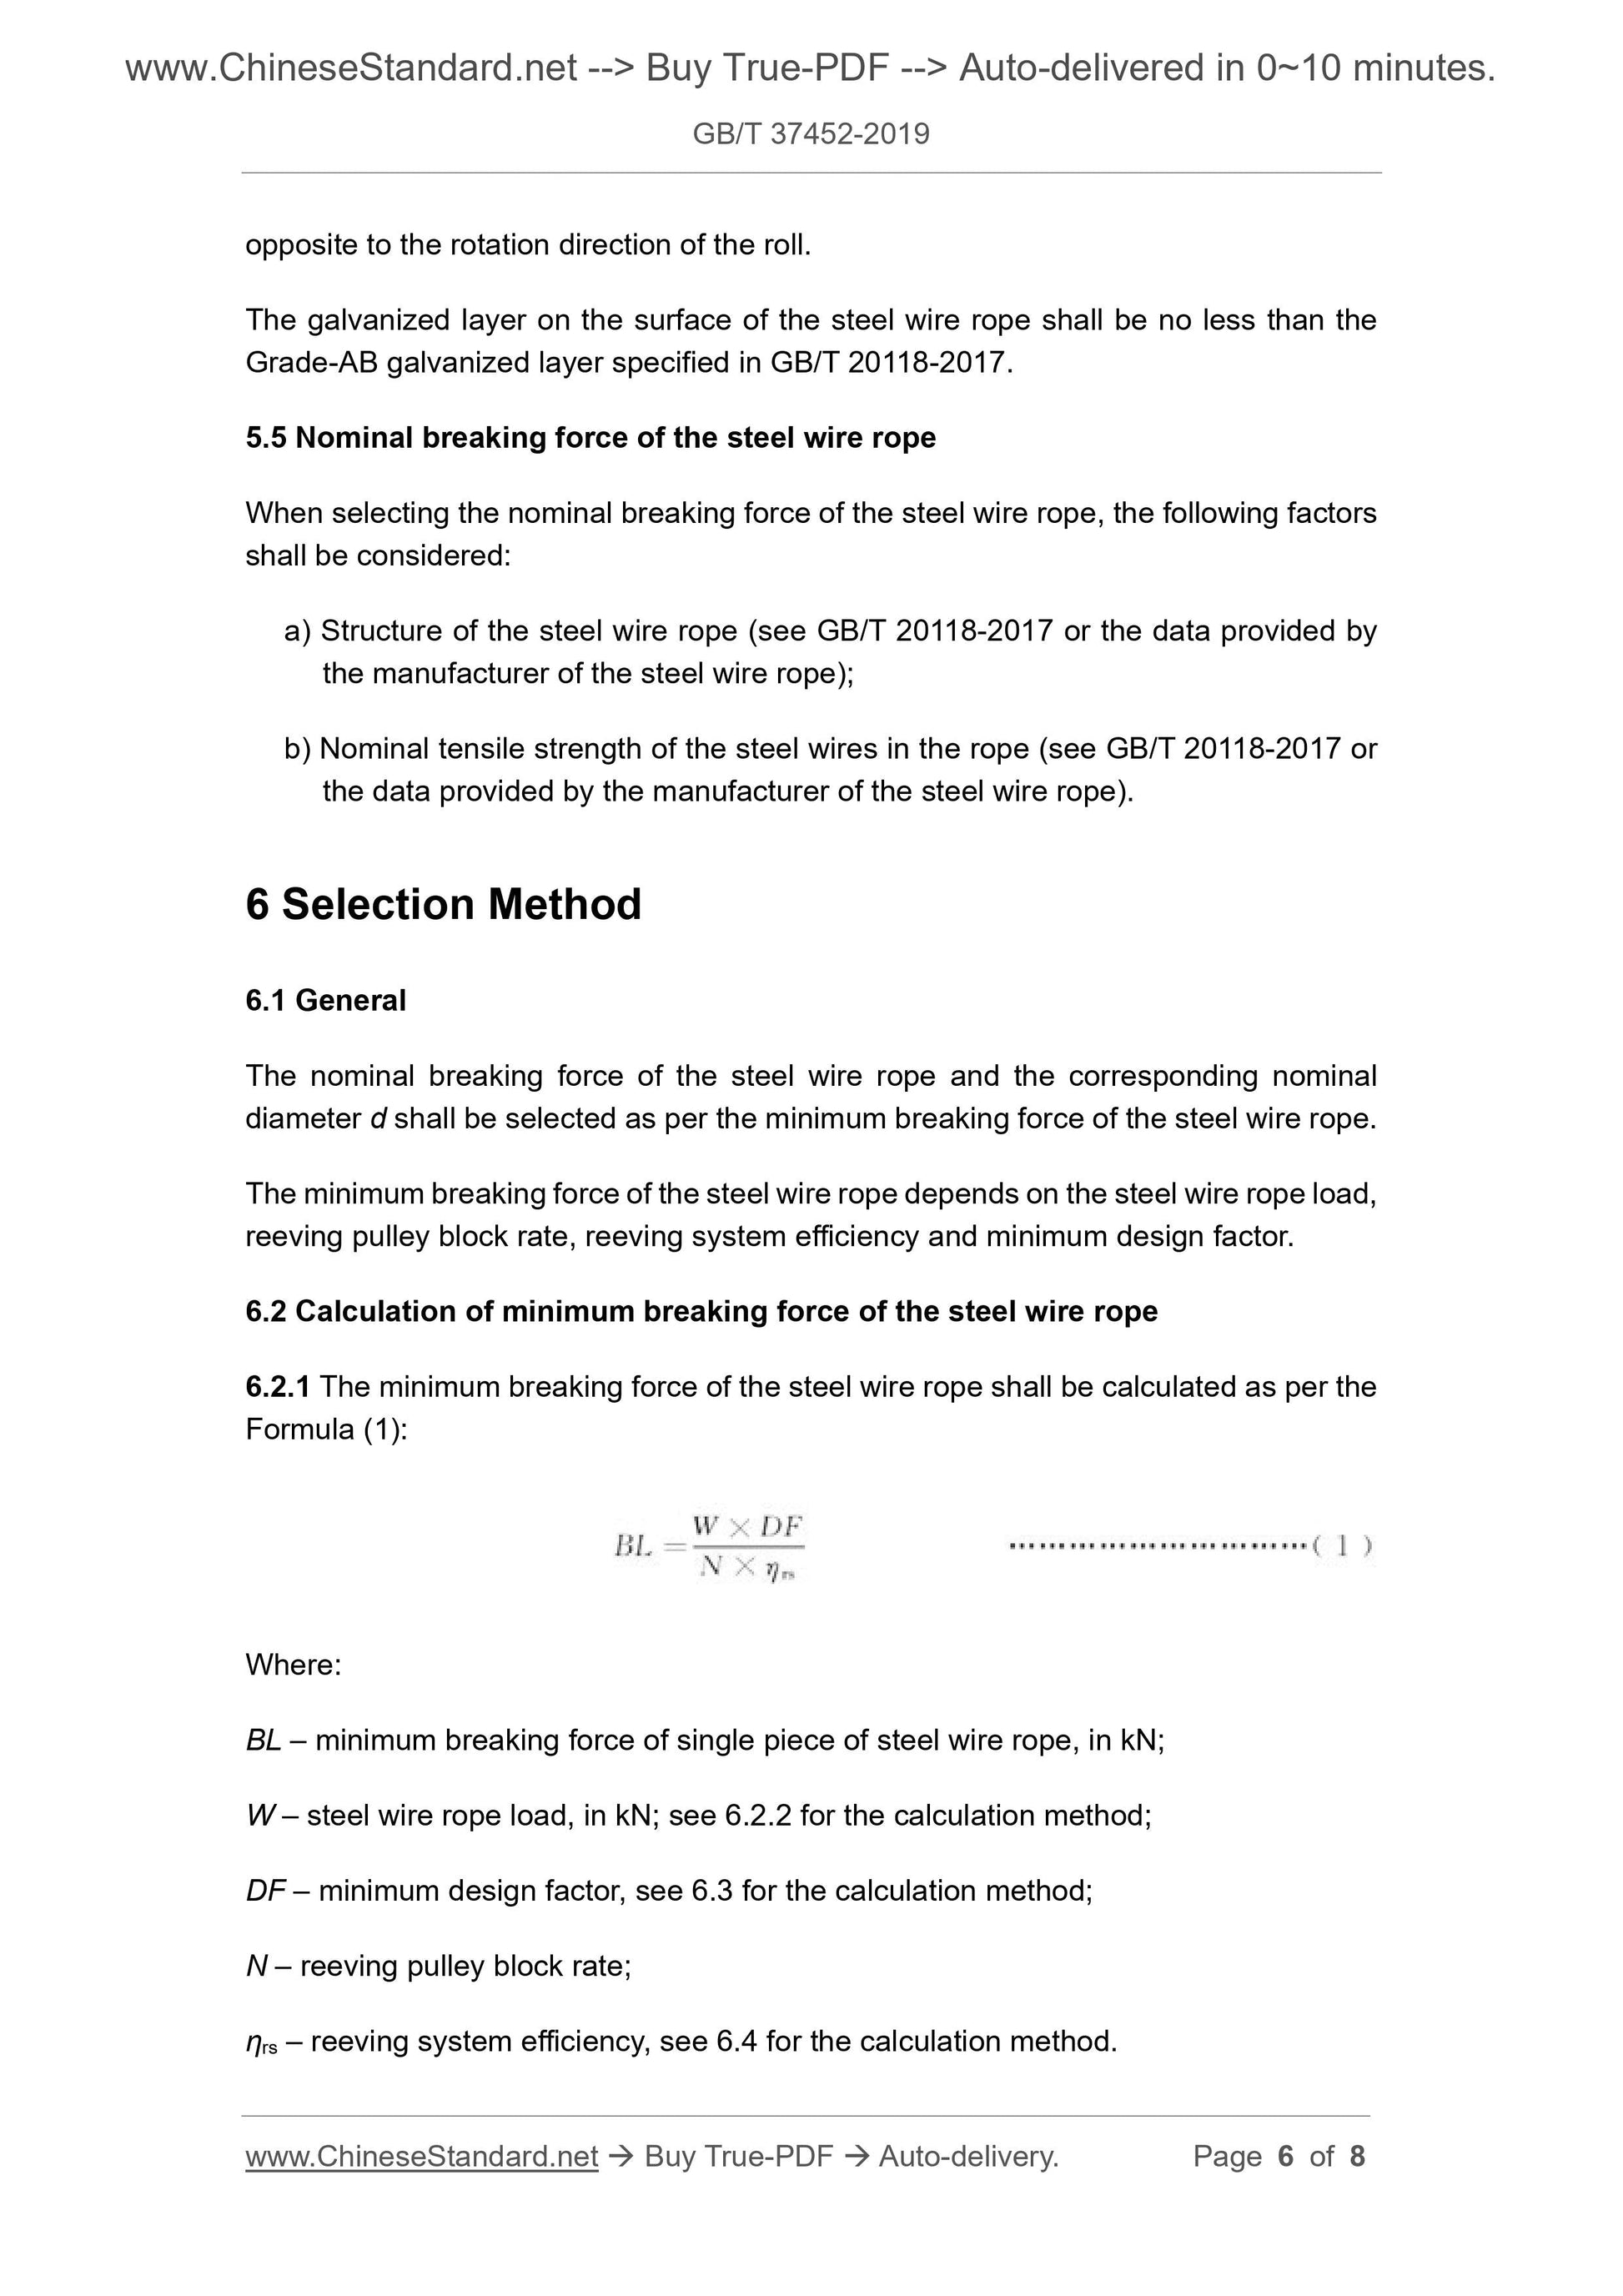 GB/T 37452-2019 Page 4